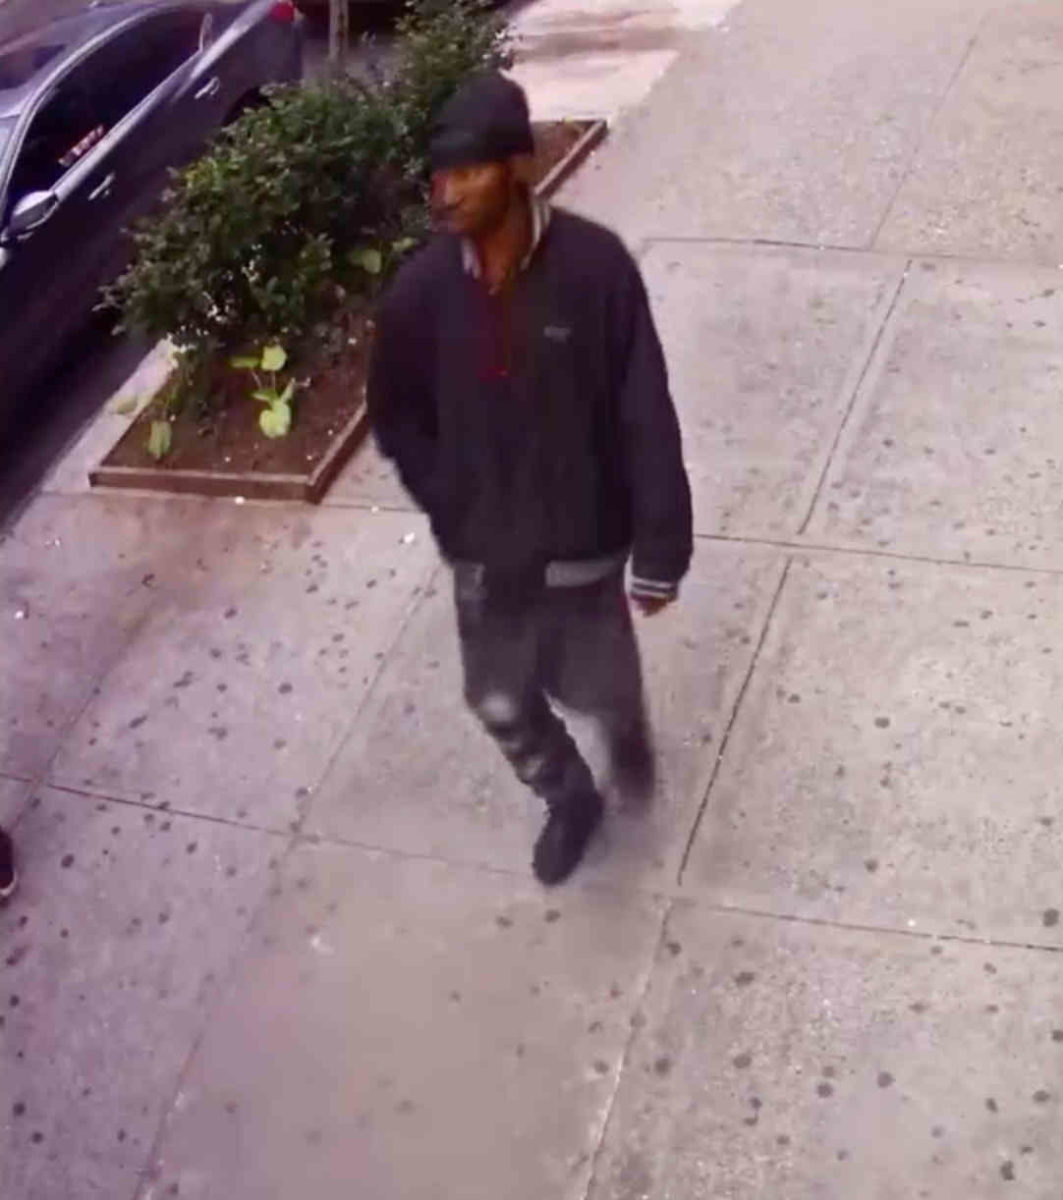 Creep gropes woman in Downtown apartment building: NYPD